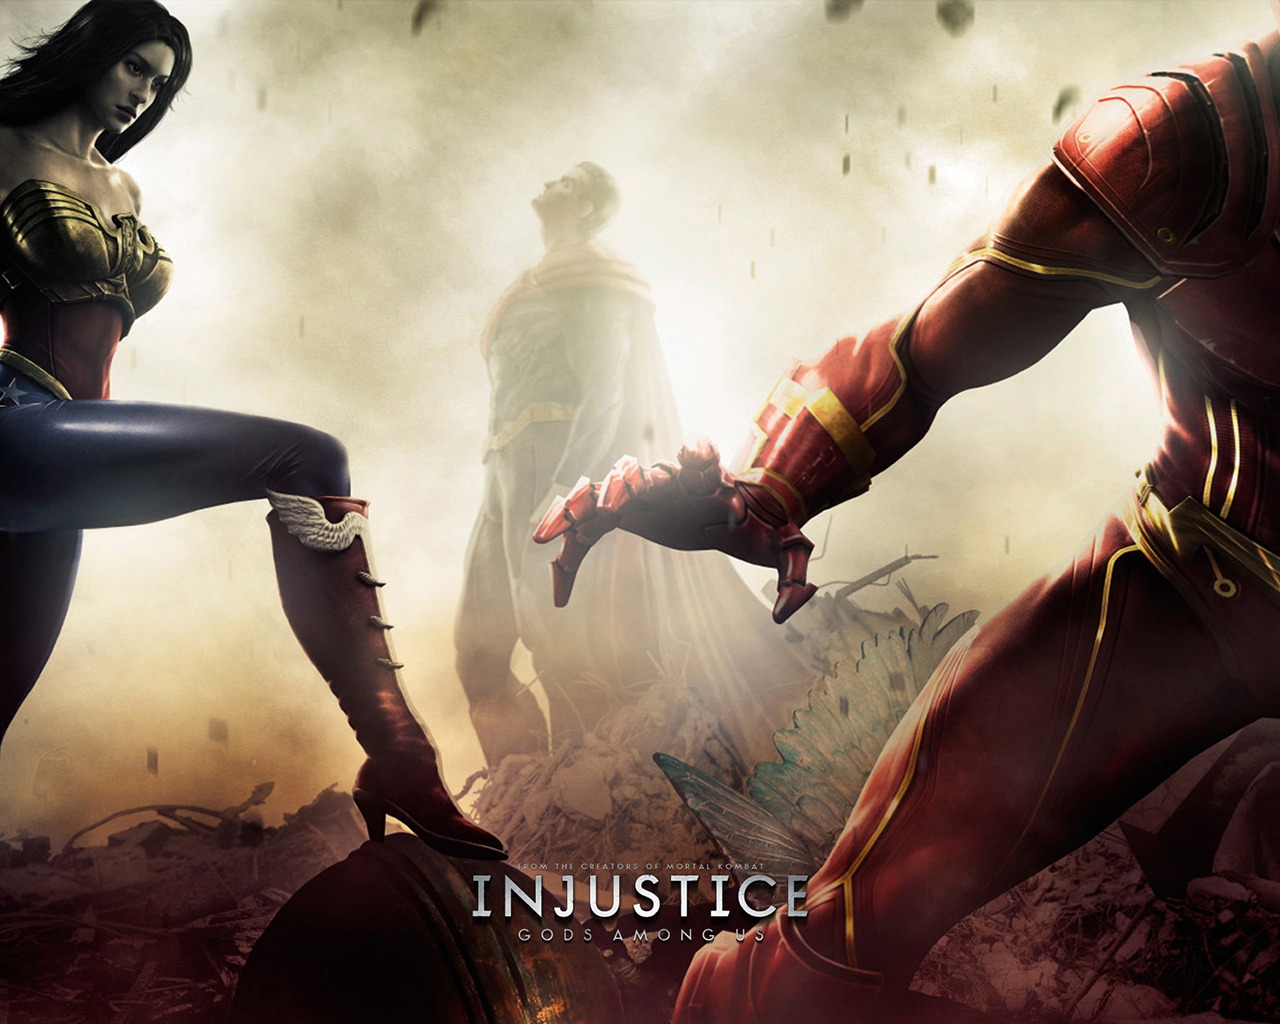 Injustice Gods Among Us Game for 1280 x 1024 resolution